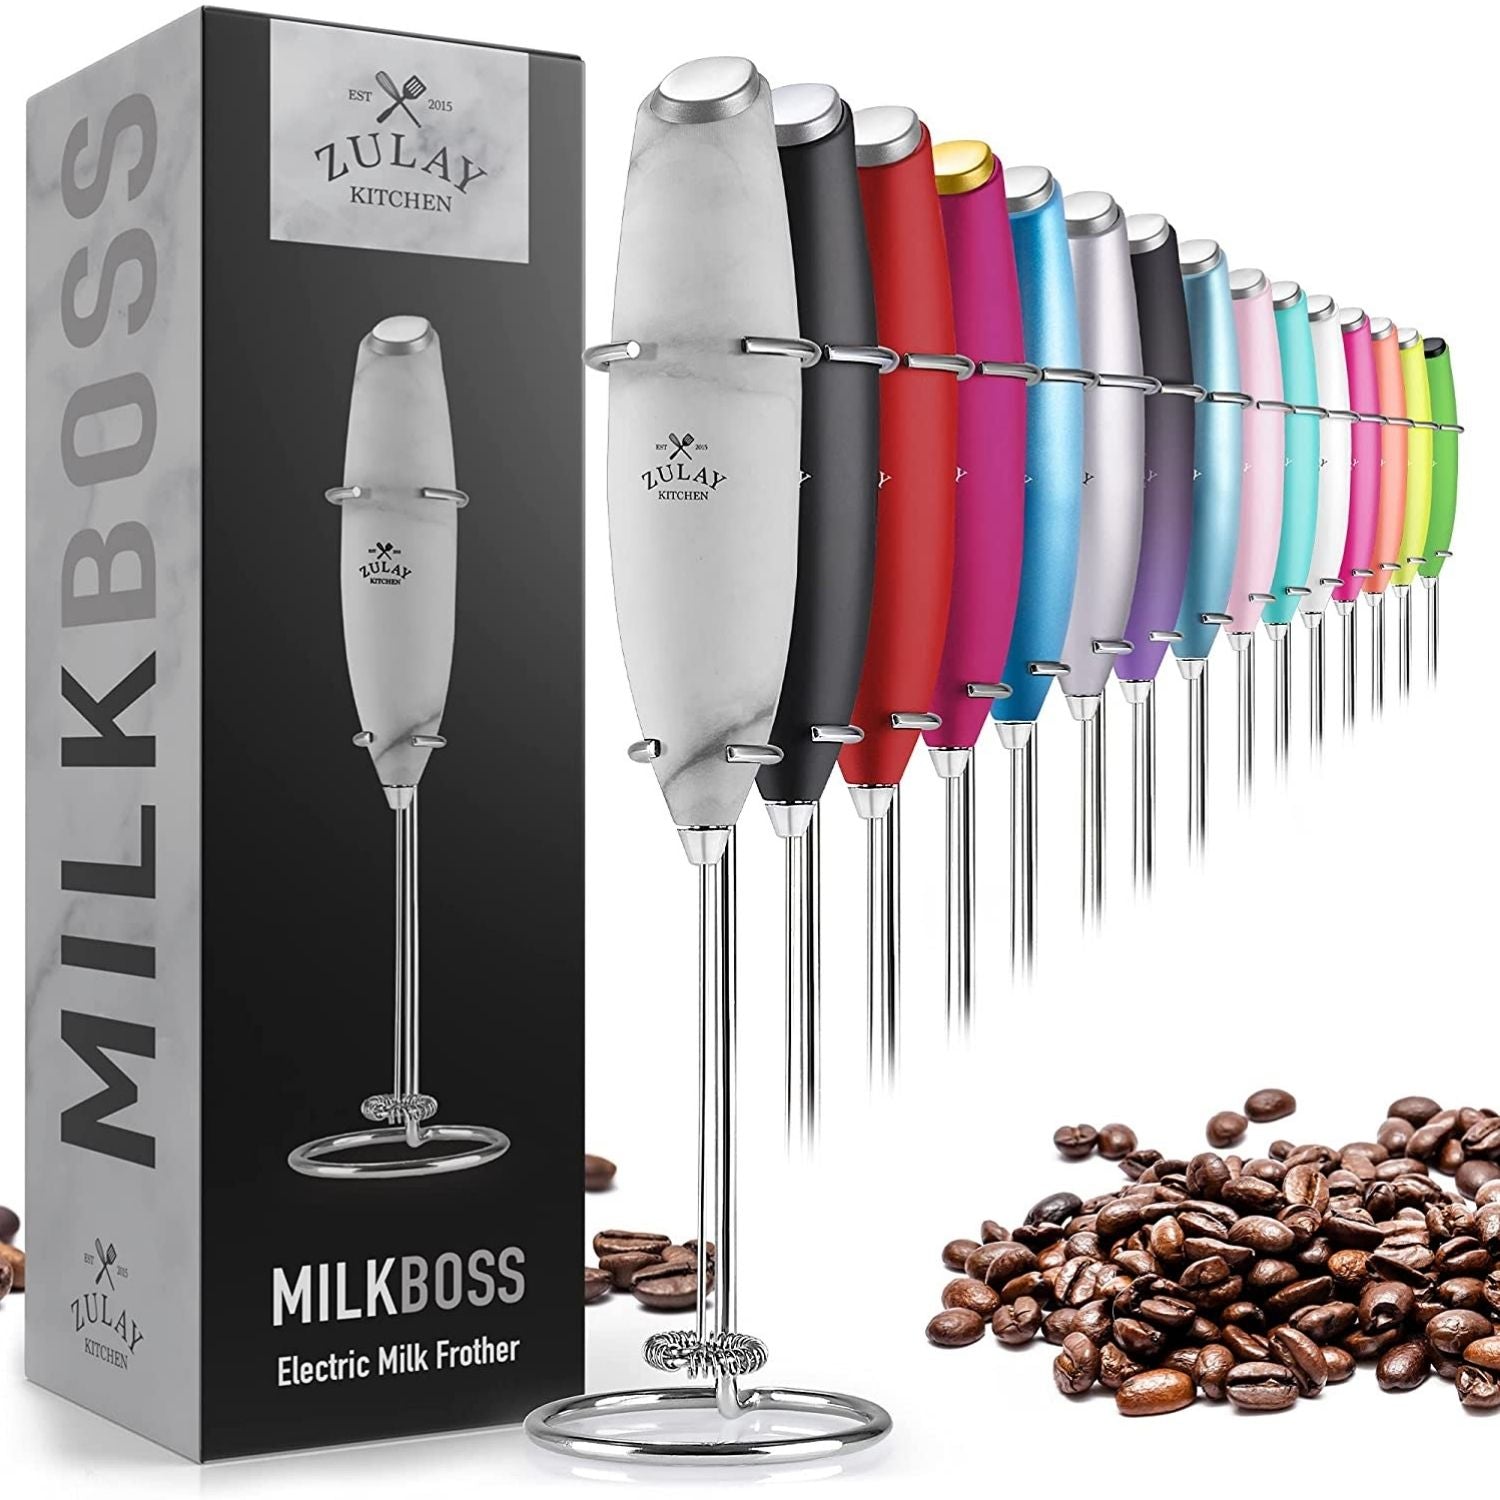 BRAND NEW!! Zulay Premium Milk Boss Electric Milk Frother 2L4